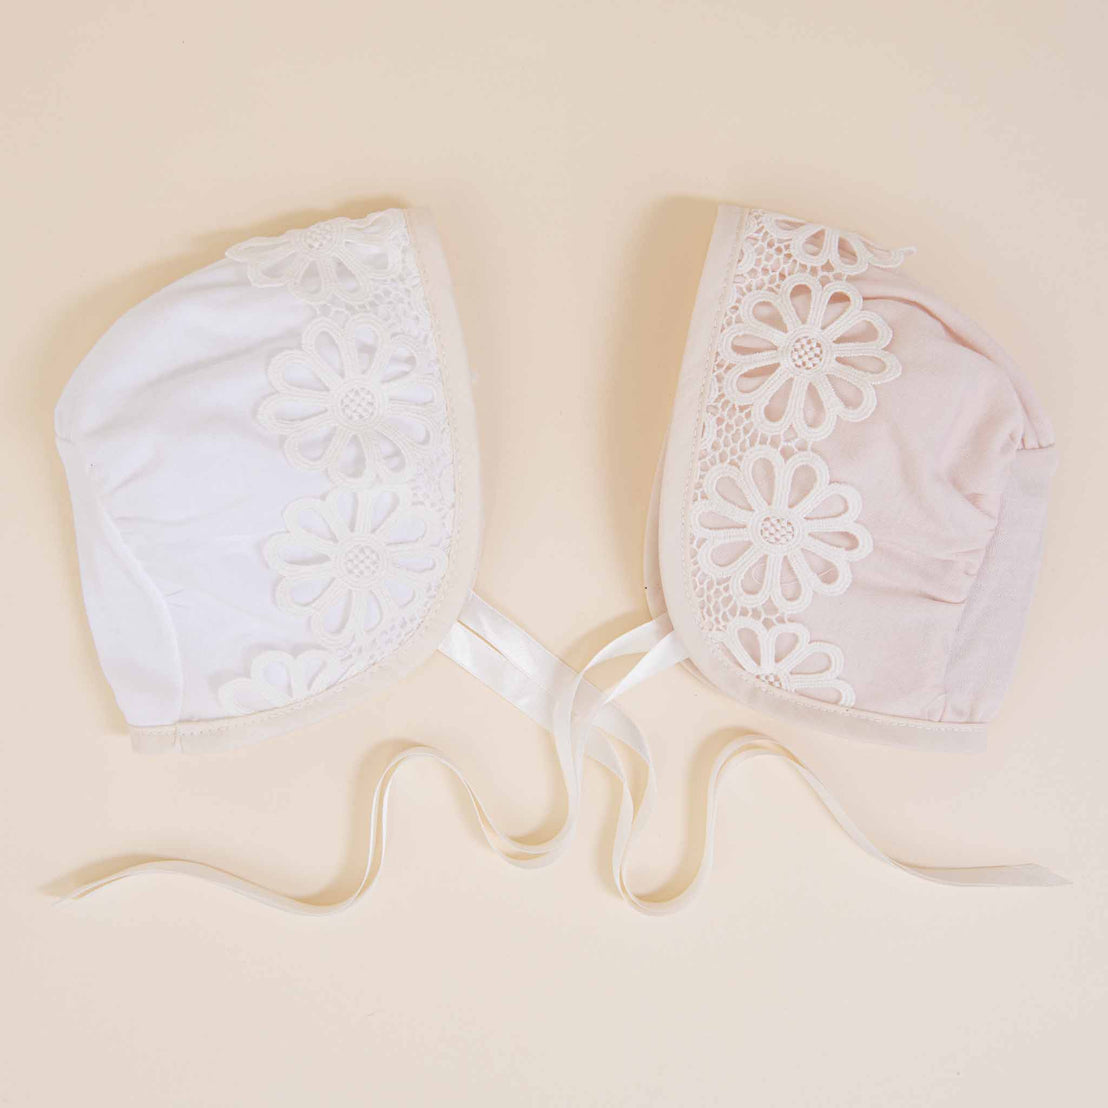 A delicate, lacy white bra with floral patterns displayed flat on a soft beige background, with its ribbons gracefully unfurled. This Hannah Newborn Gift Set- Save 10% offers a unique baby gift for the newborn.